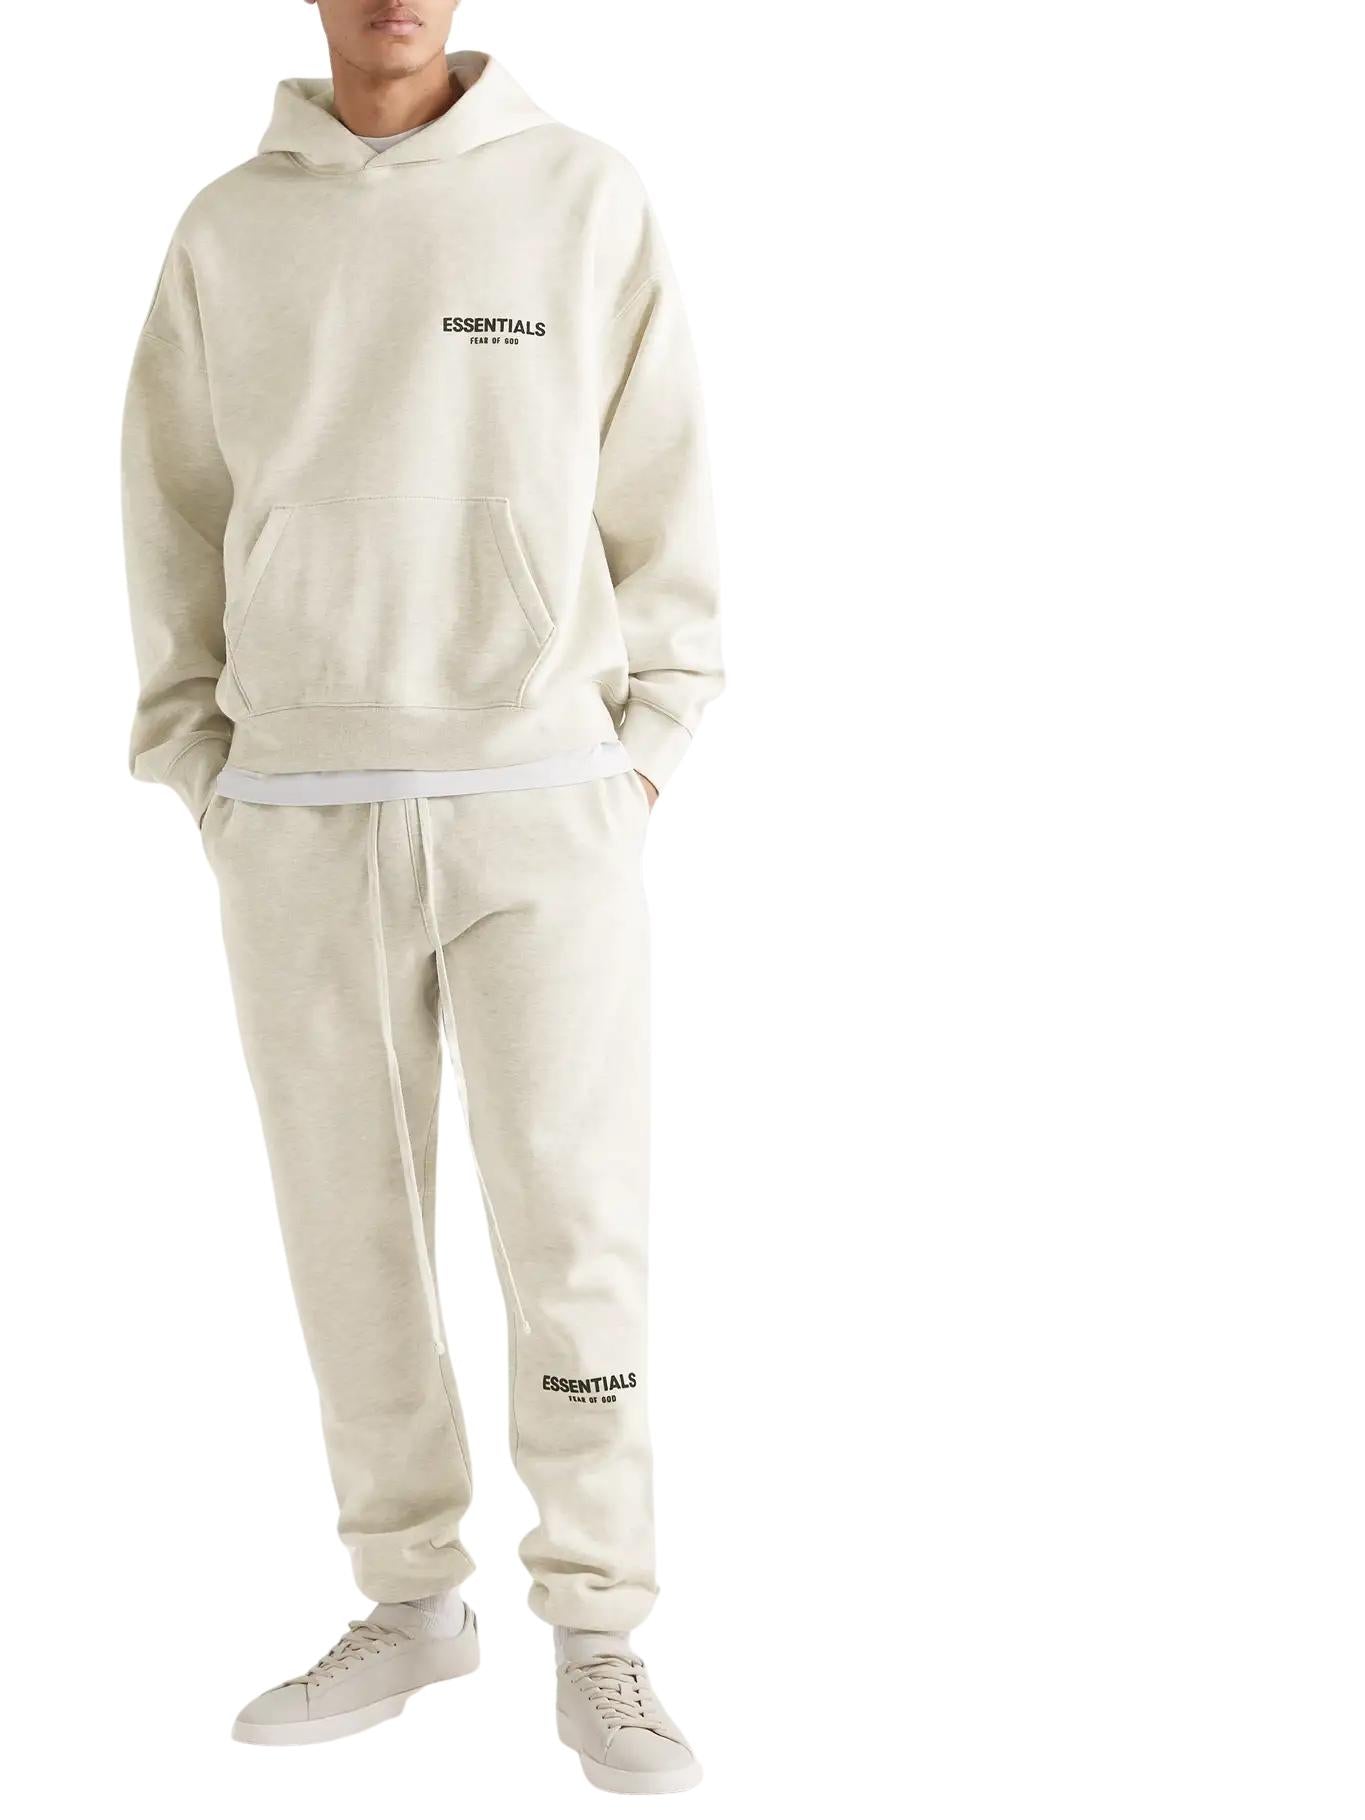 FEAR OF GOD ESSENTIALS CORE COLLECTION LIGHT HEATHER OATMEAL TRACKSUIT ...